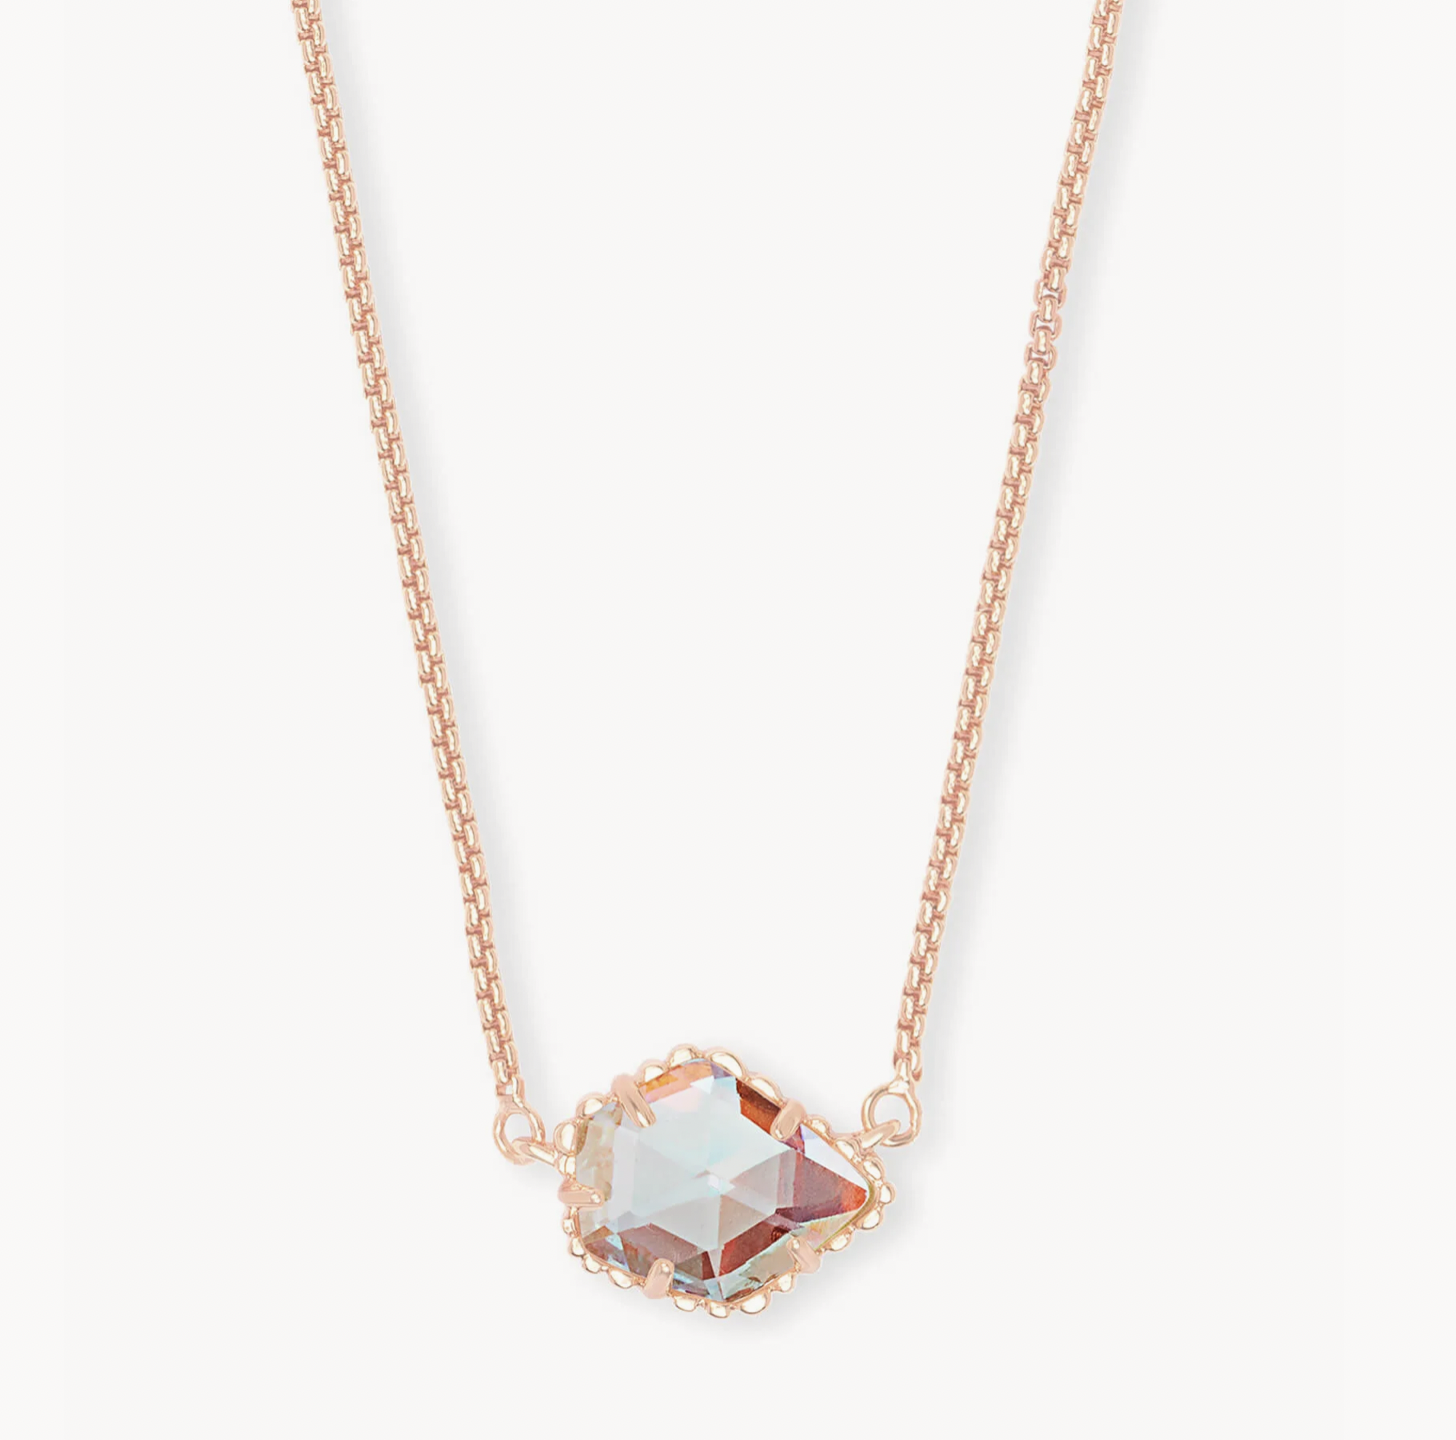 Tess Gold Dichroic Glass Necklace